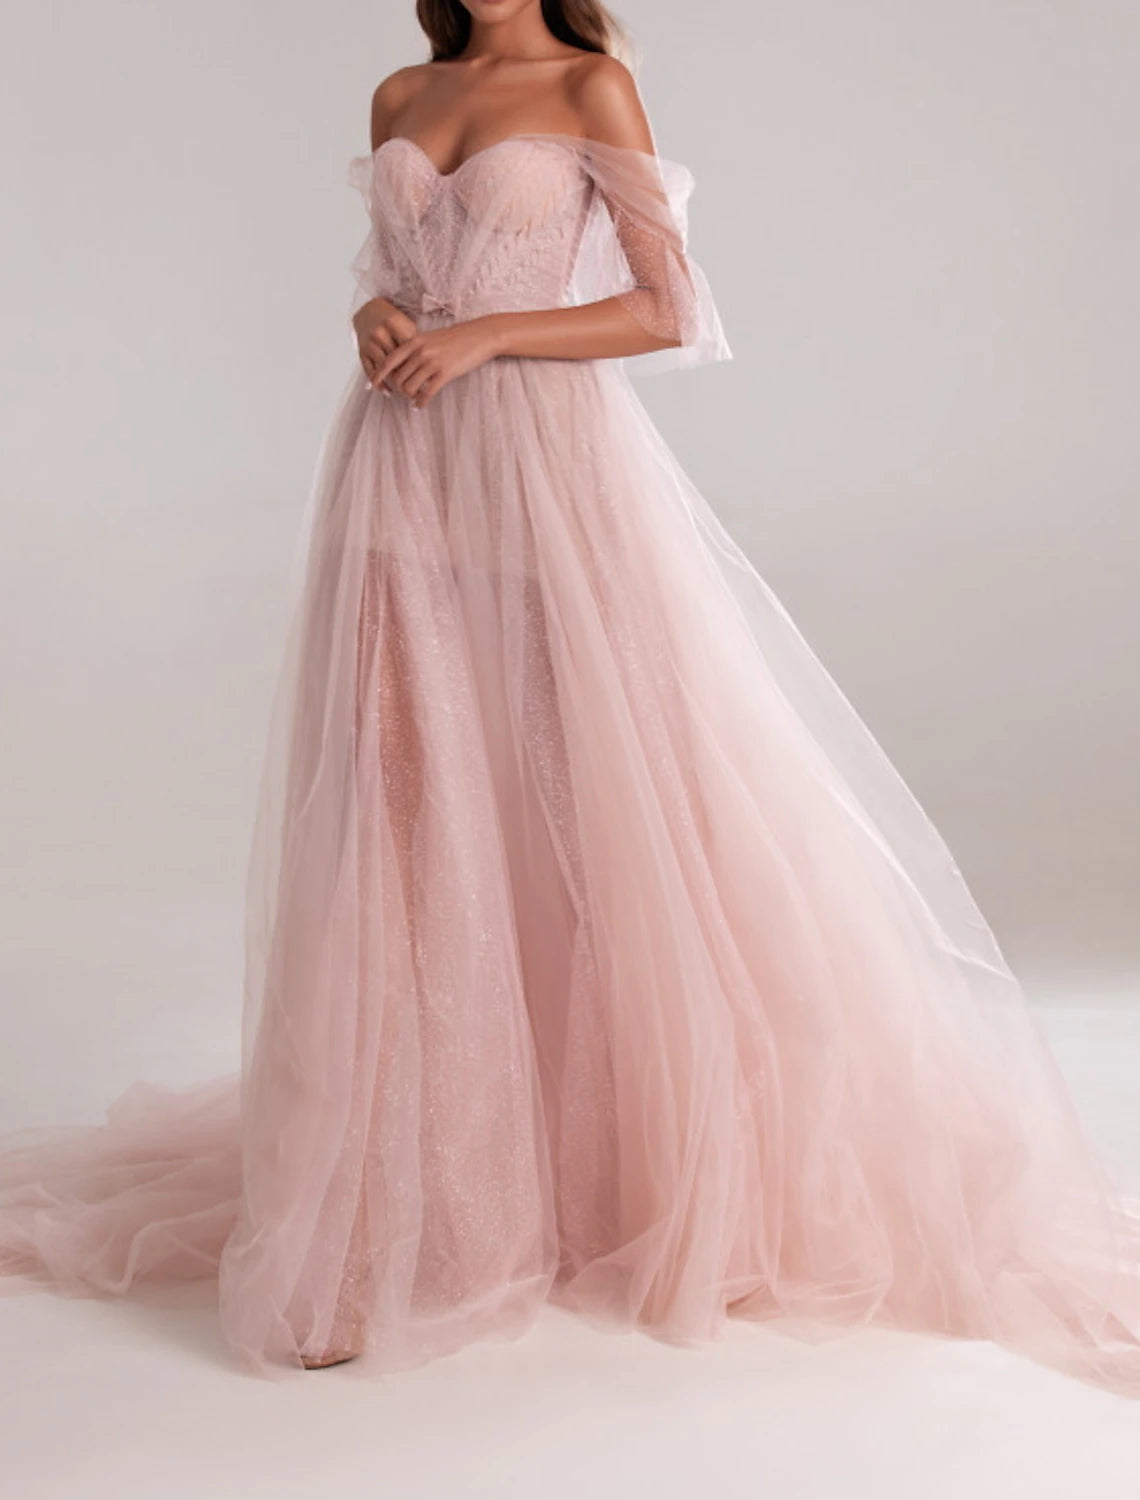 A-Line Elegant Engagement Formal Evening Dress Sweetheart Neckline Sleeveless Court Train Tulle with Bow(s) Pleats